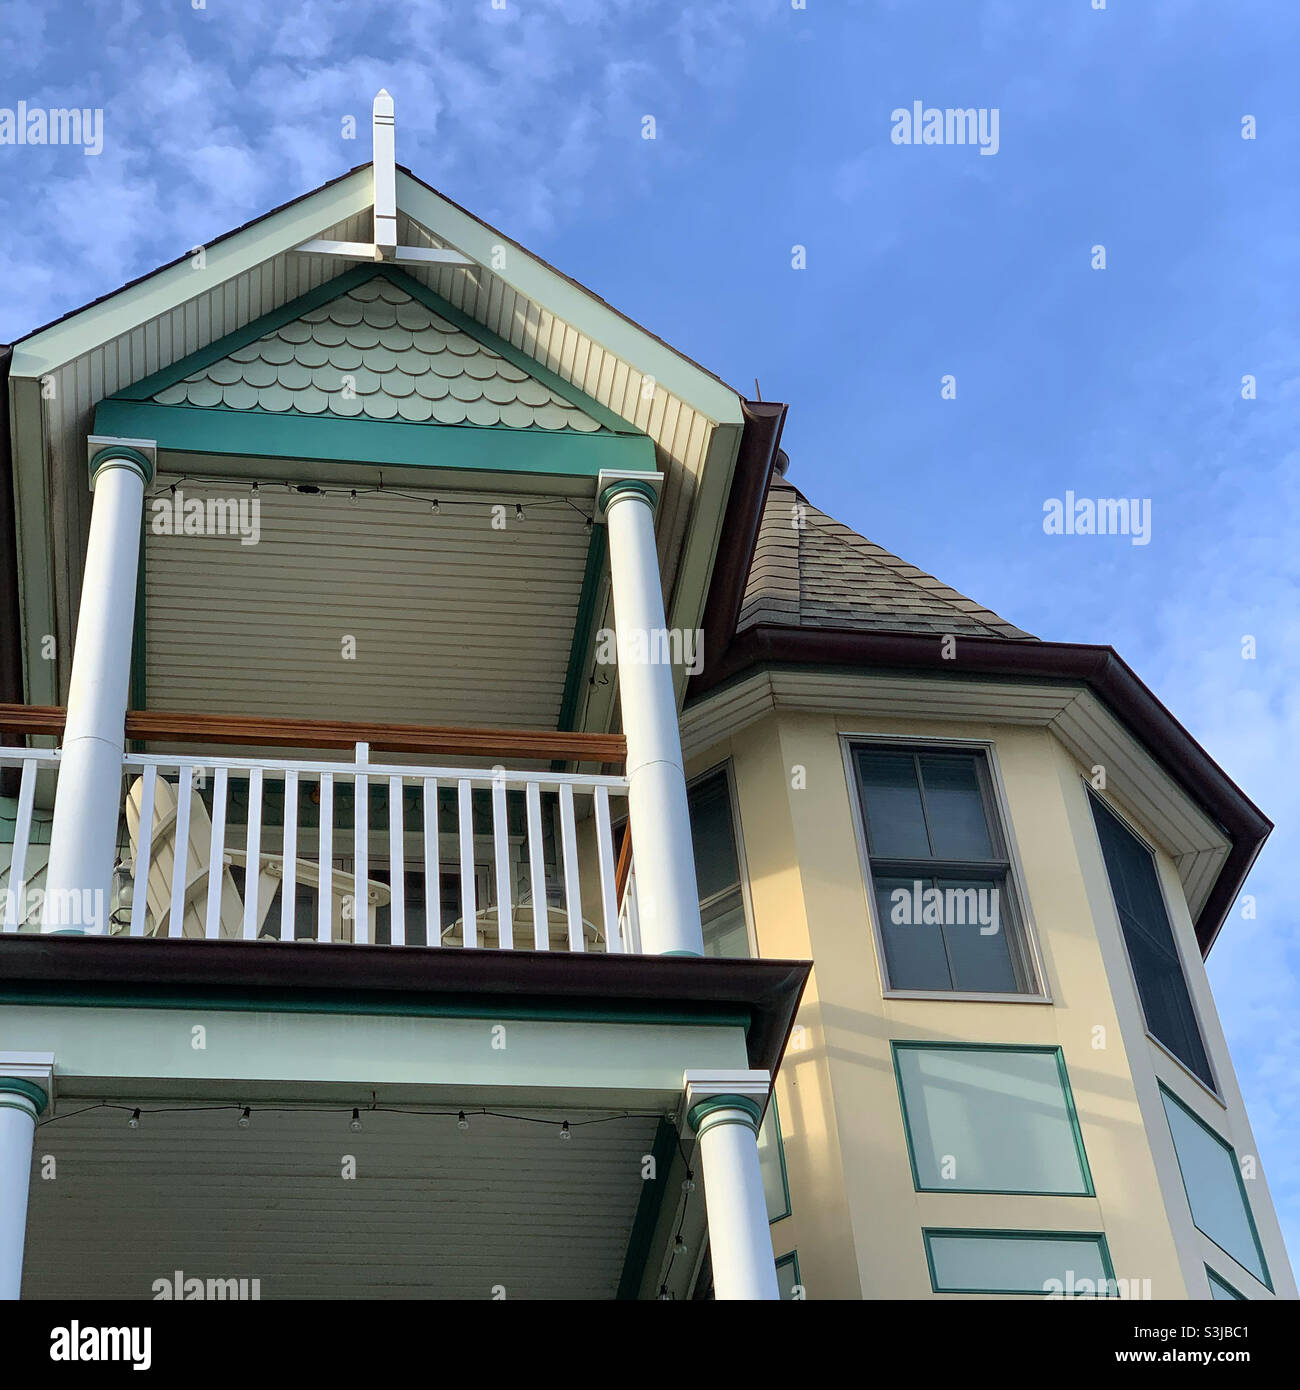 August 2021, Detail eines Hauses in Ocean Grove, Neptune Township, Monmouth County, New Jersey, USA Stockfoto